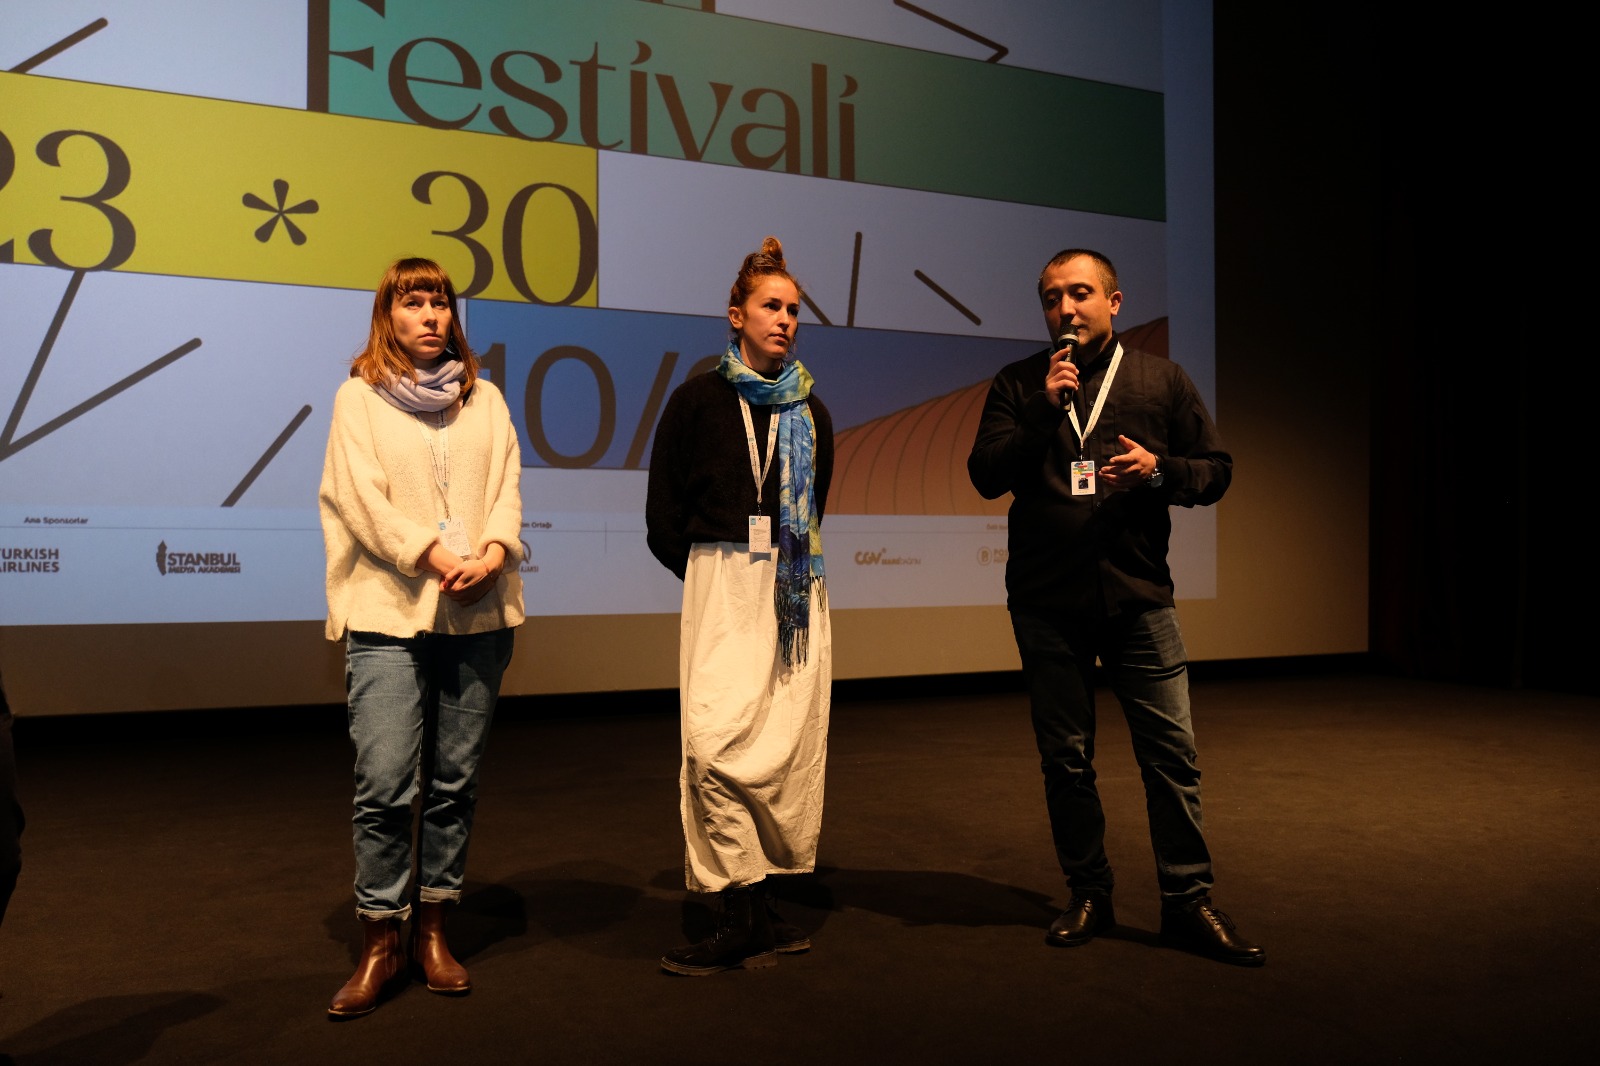 ANOTHER DAY FULL OF FILMS WENT BY AT THE 9TH BOSPHORUS FILM FESTIVAL